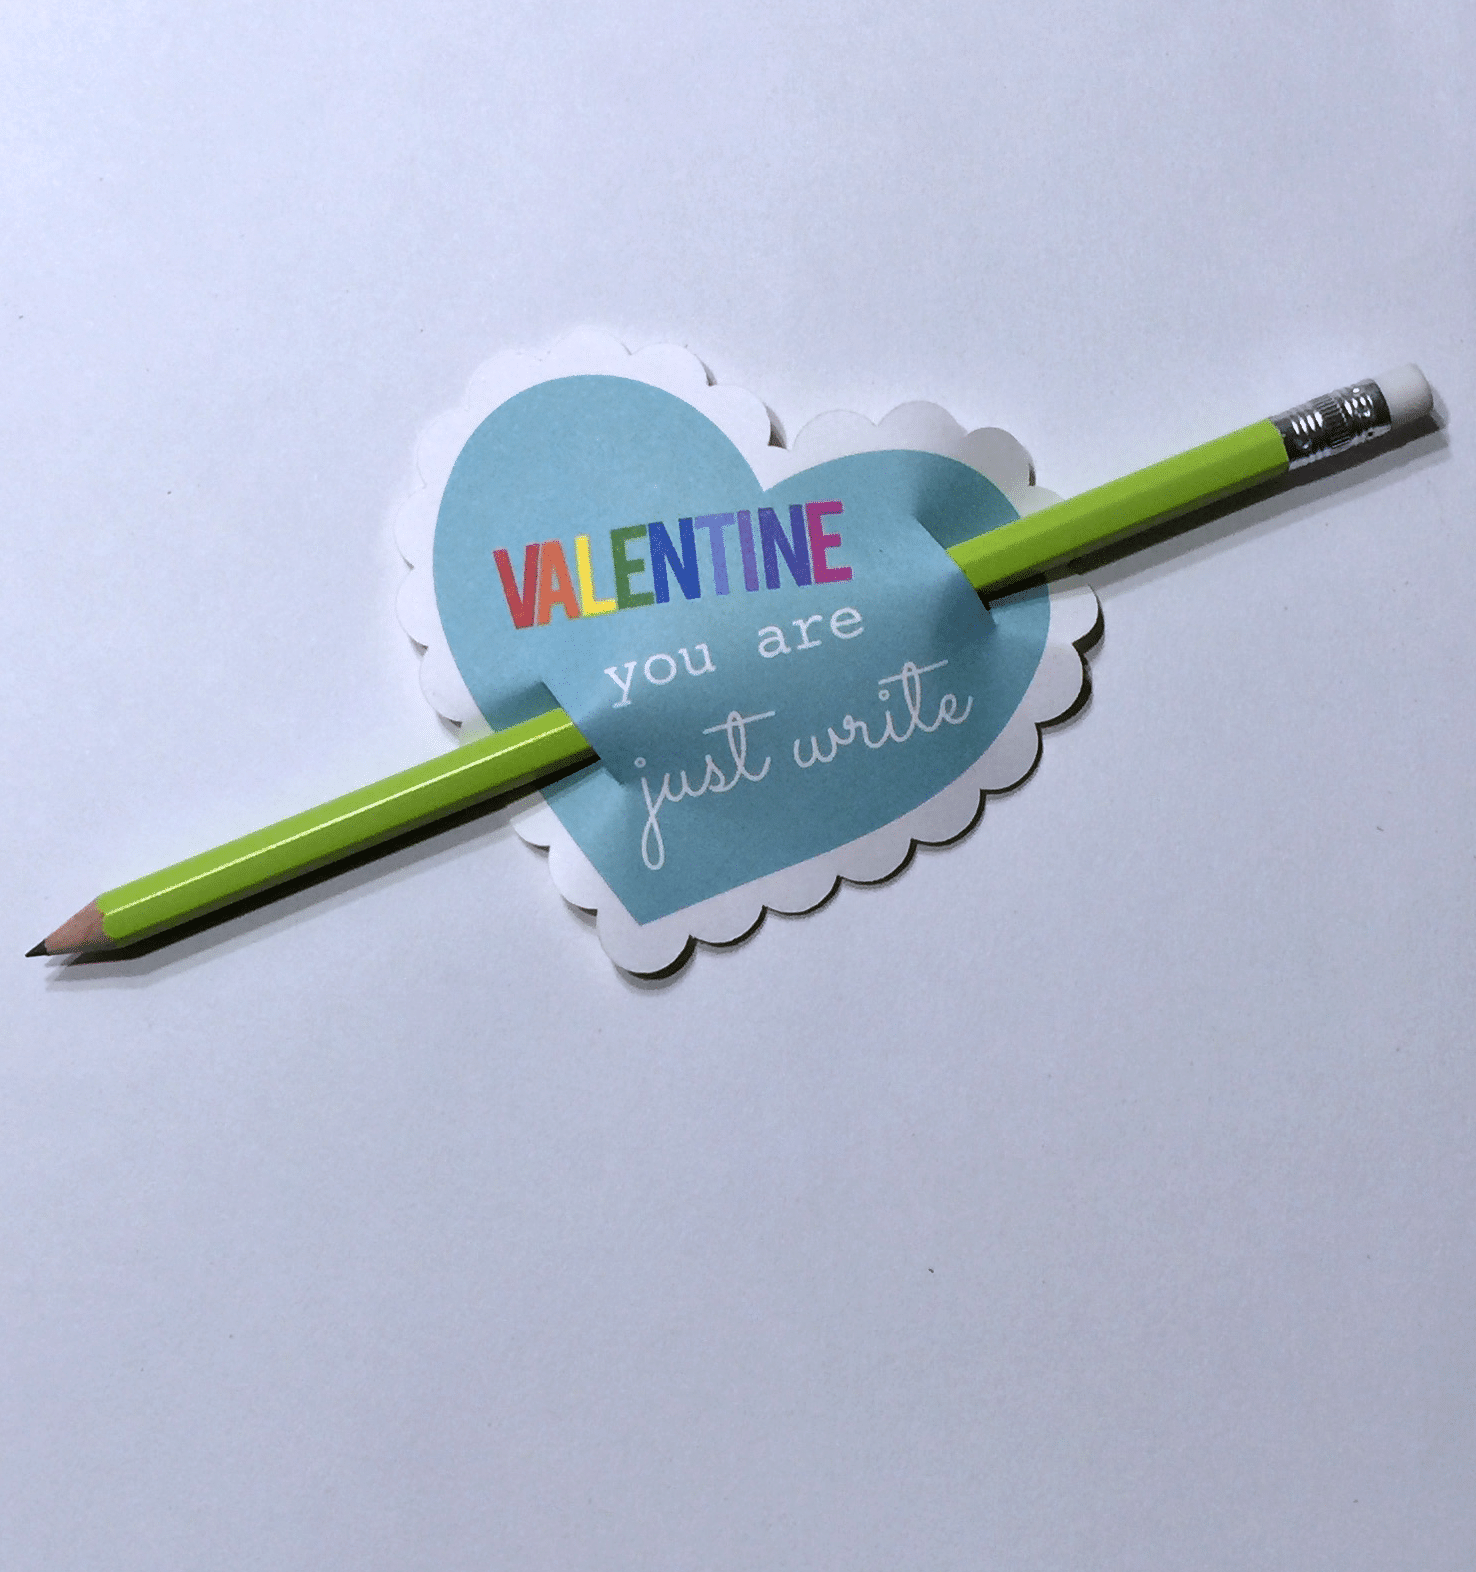 Valentine you are just write